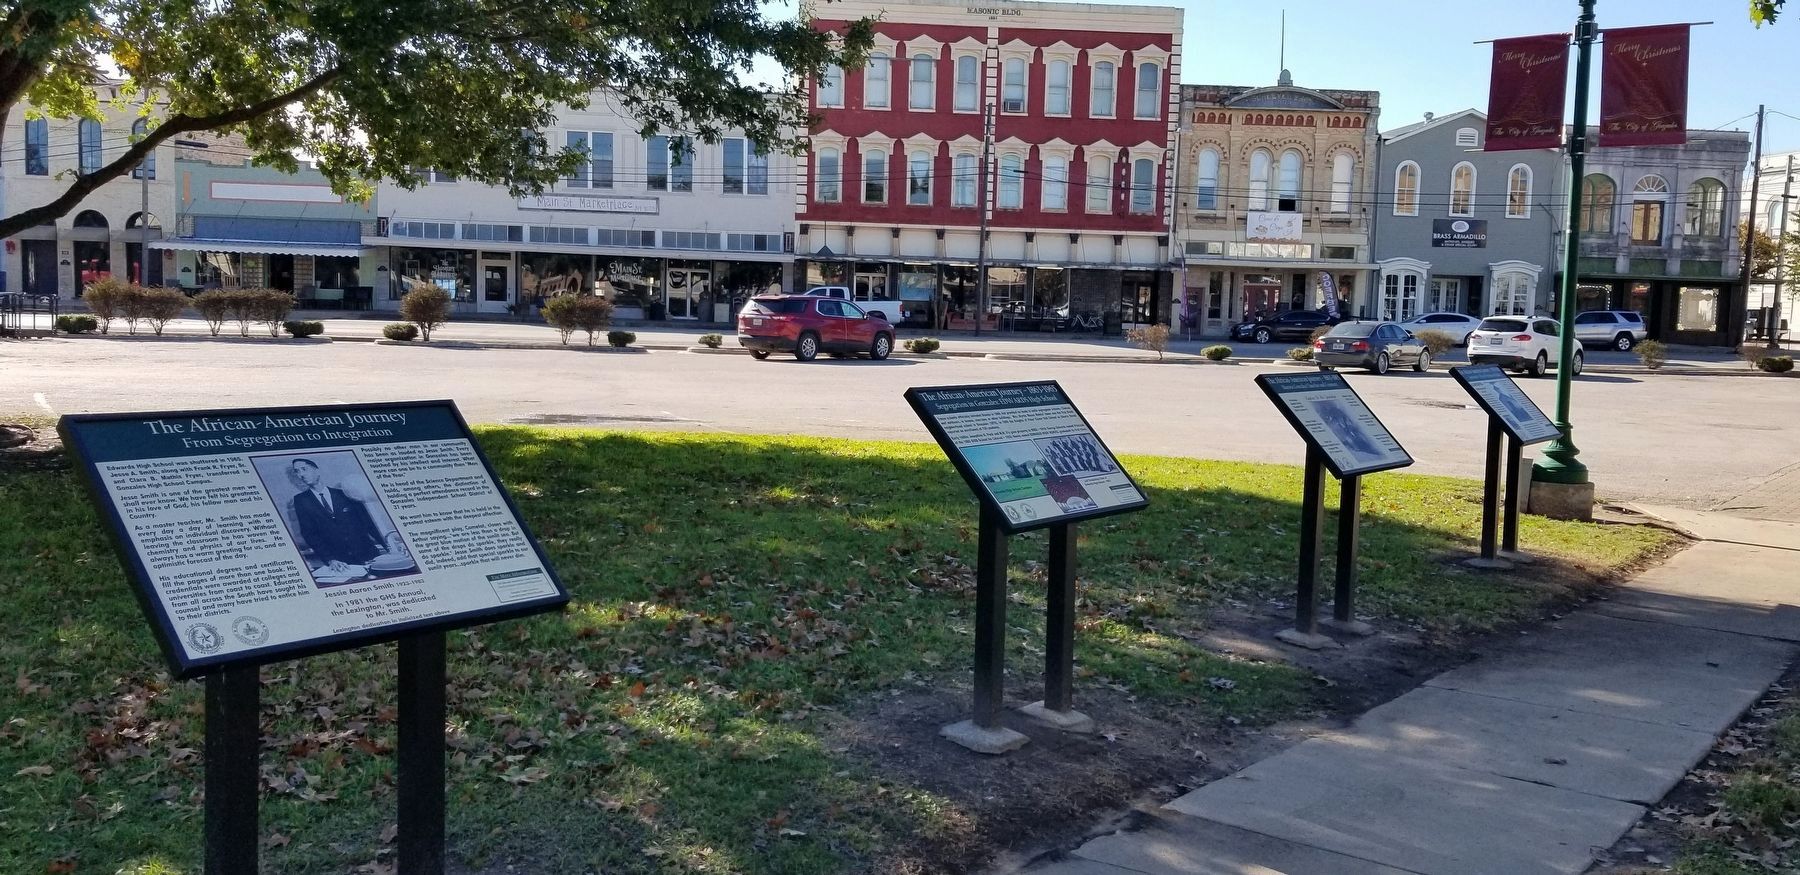 The From Segregation to Integration Marker is the marker on the left of the four markers image. Click for full size.